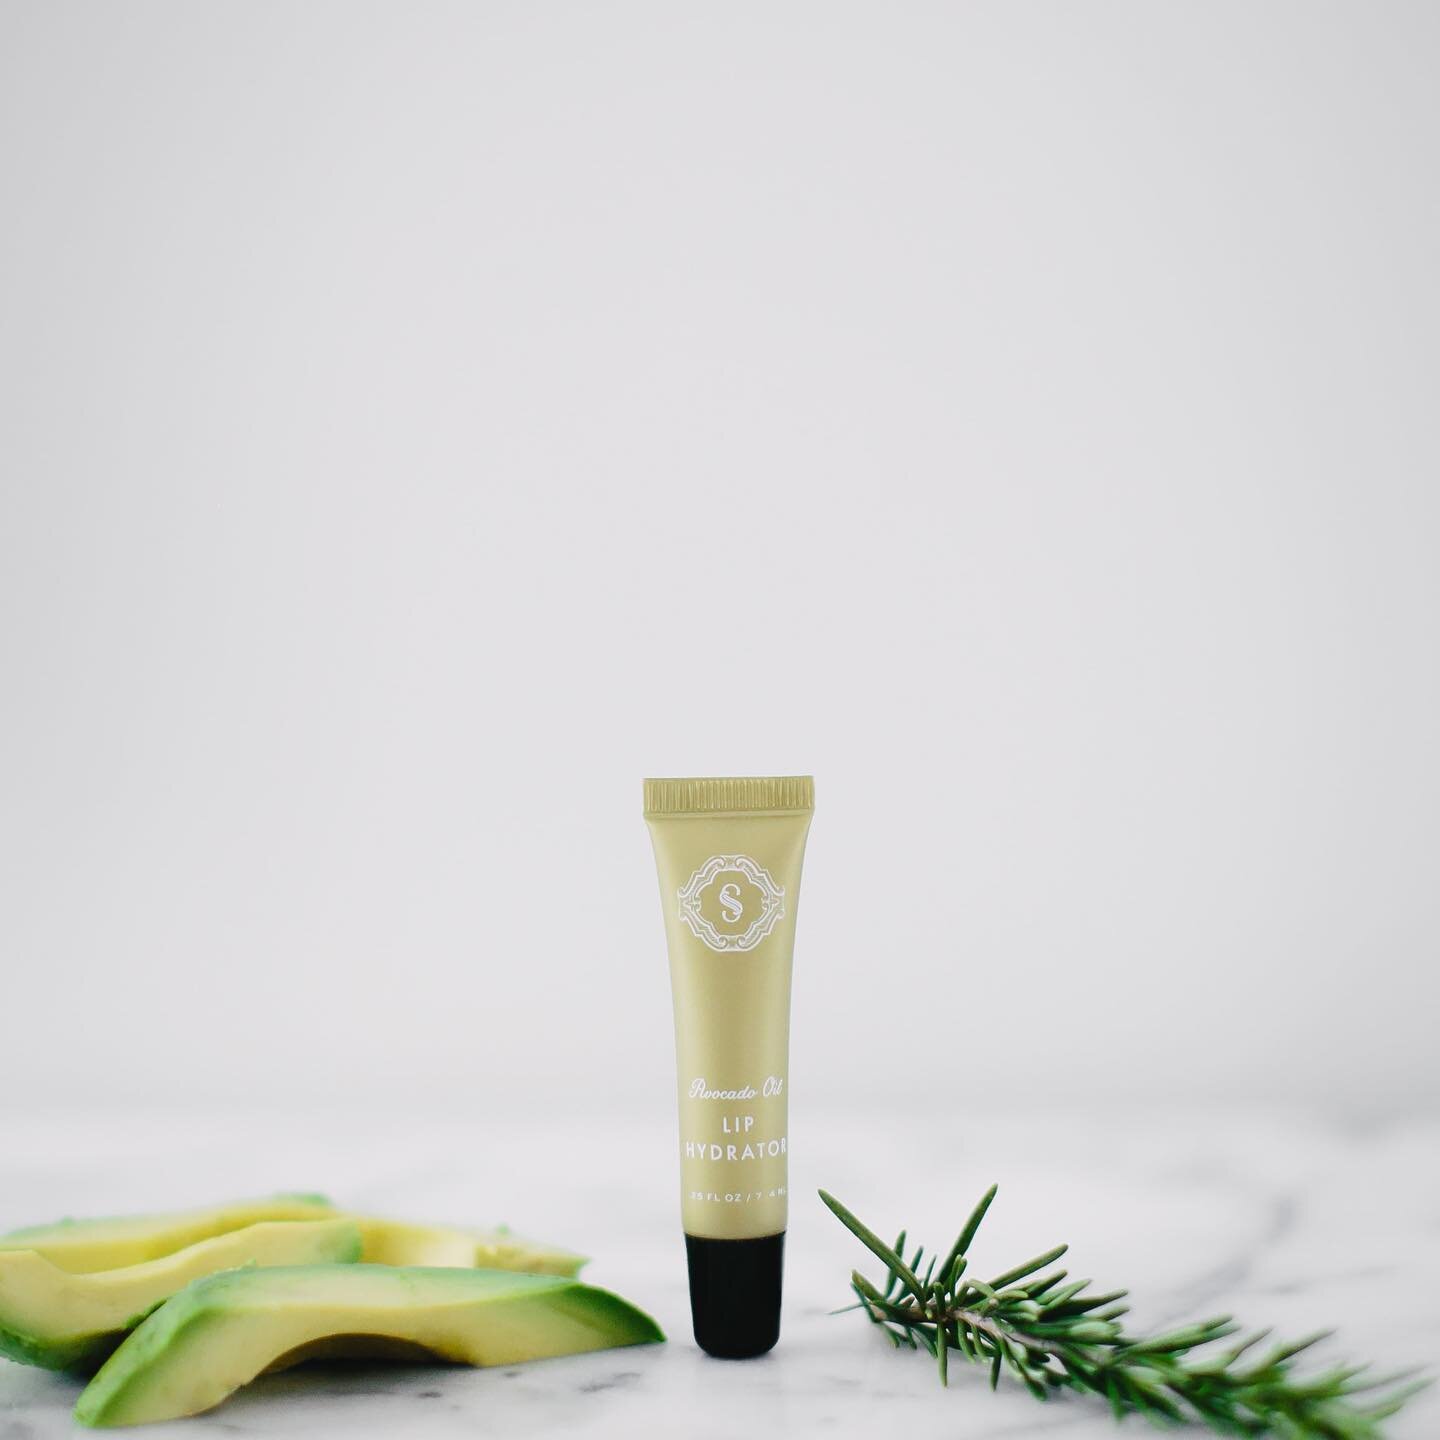 I don&rsquo;t know about you, but mask wearing has definitely lead to dry skin and lips. Lately, I&rsquo;ve been using this little miracle to help - Sorella&rsquo;s Avocado lip hydrator. It&rsquo;s packed with avocado oils and anti-aging polypeptides